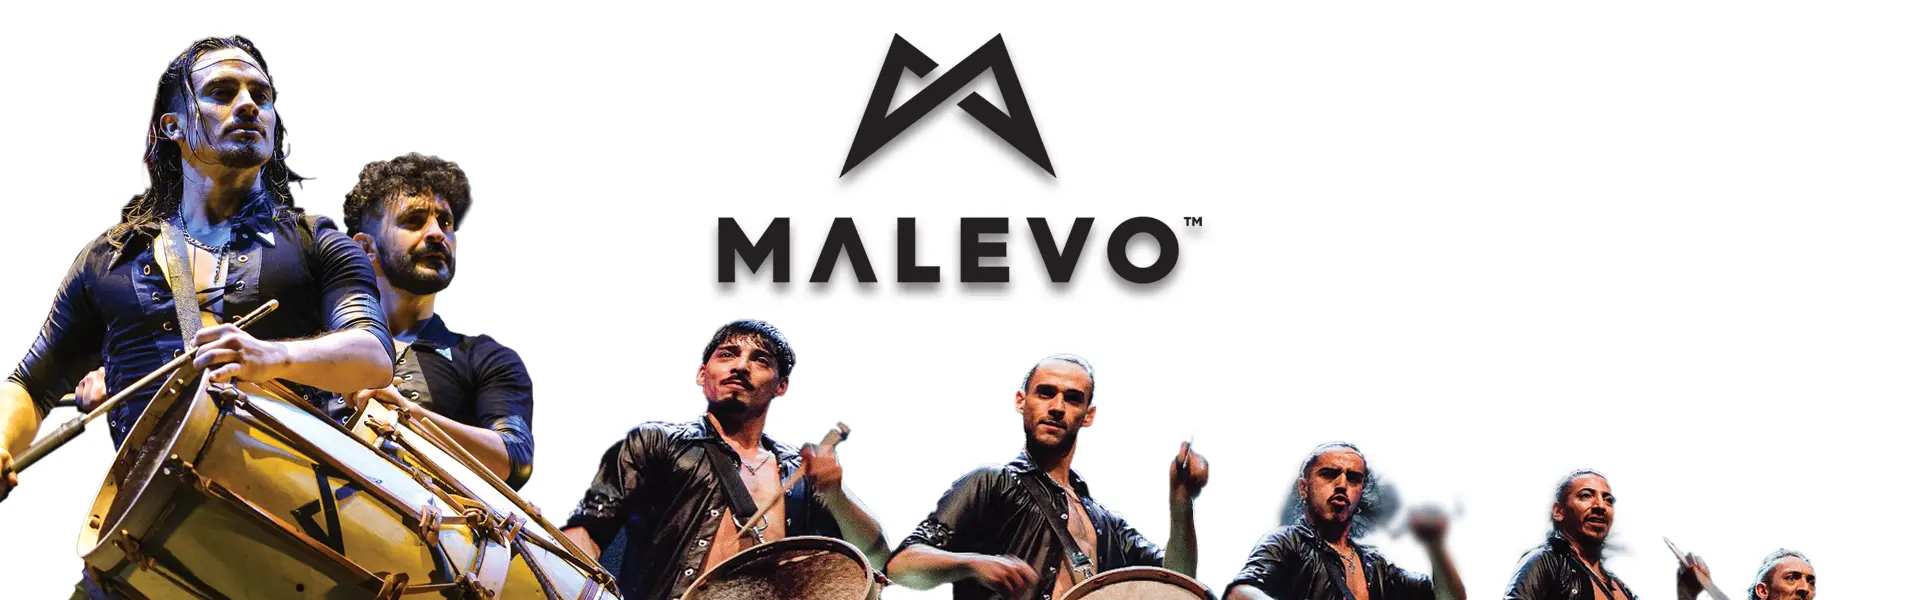 Men standing in a line playing drums that are slung over their shoulders.